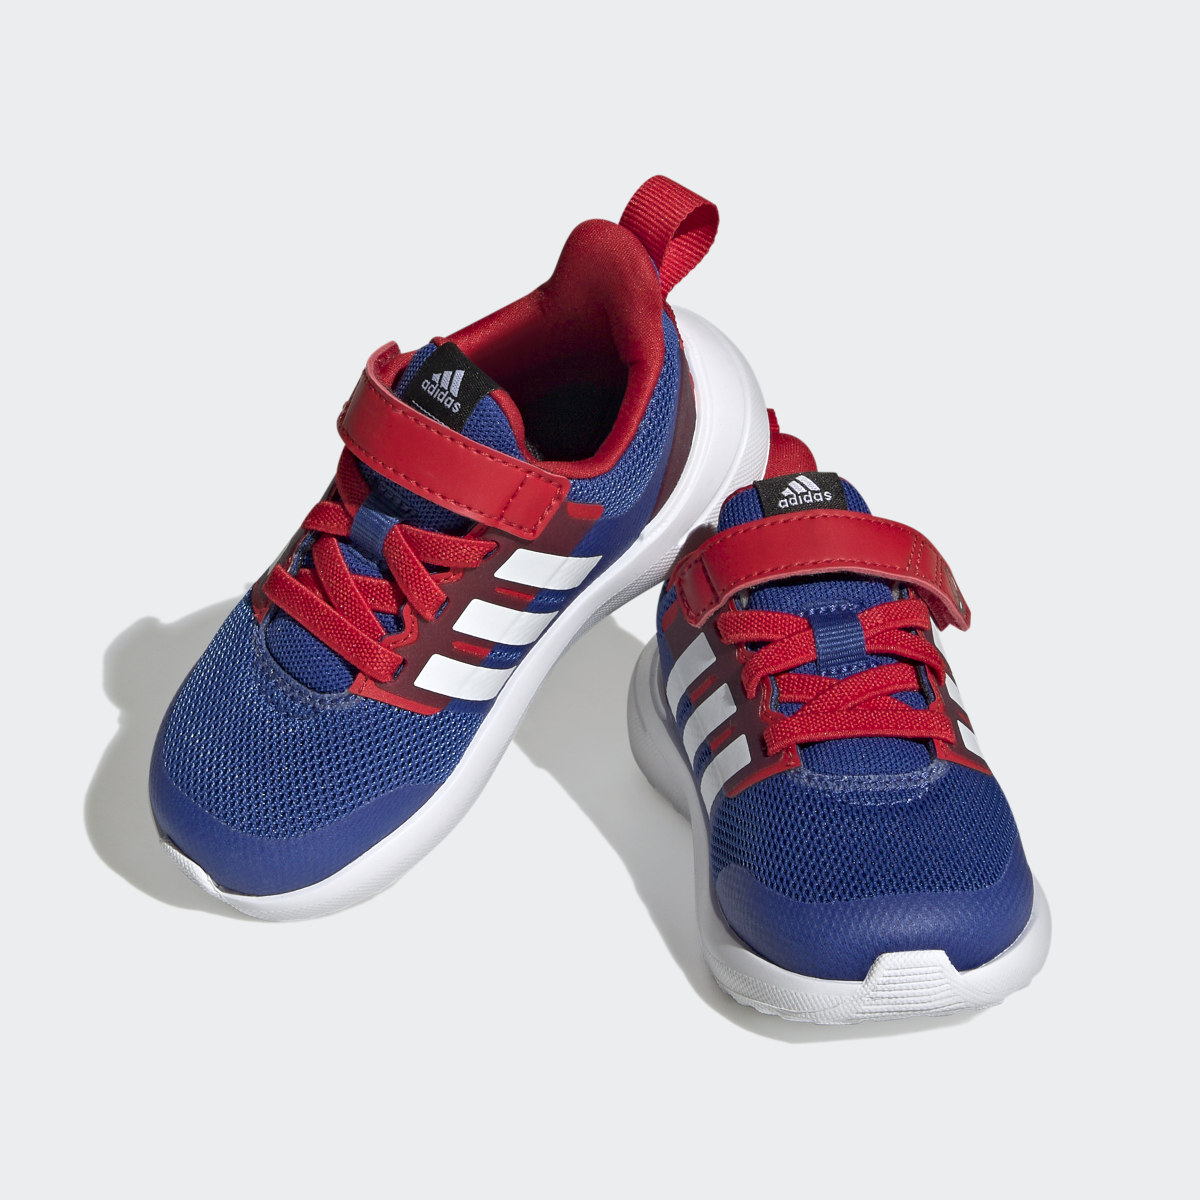 Adidas x Marvel FortaRun 2.0 Spider-Man Cloudfoam Elastic Lace Top Strap Shoes. 5